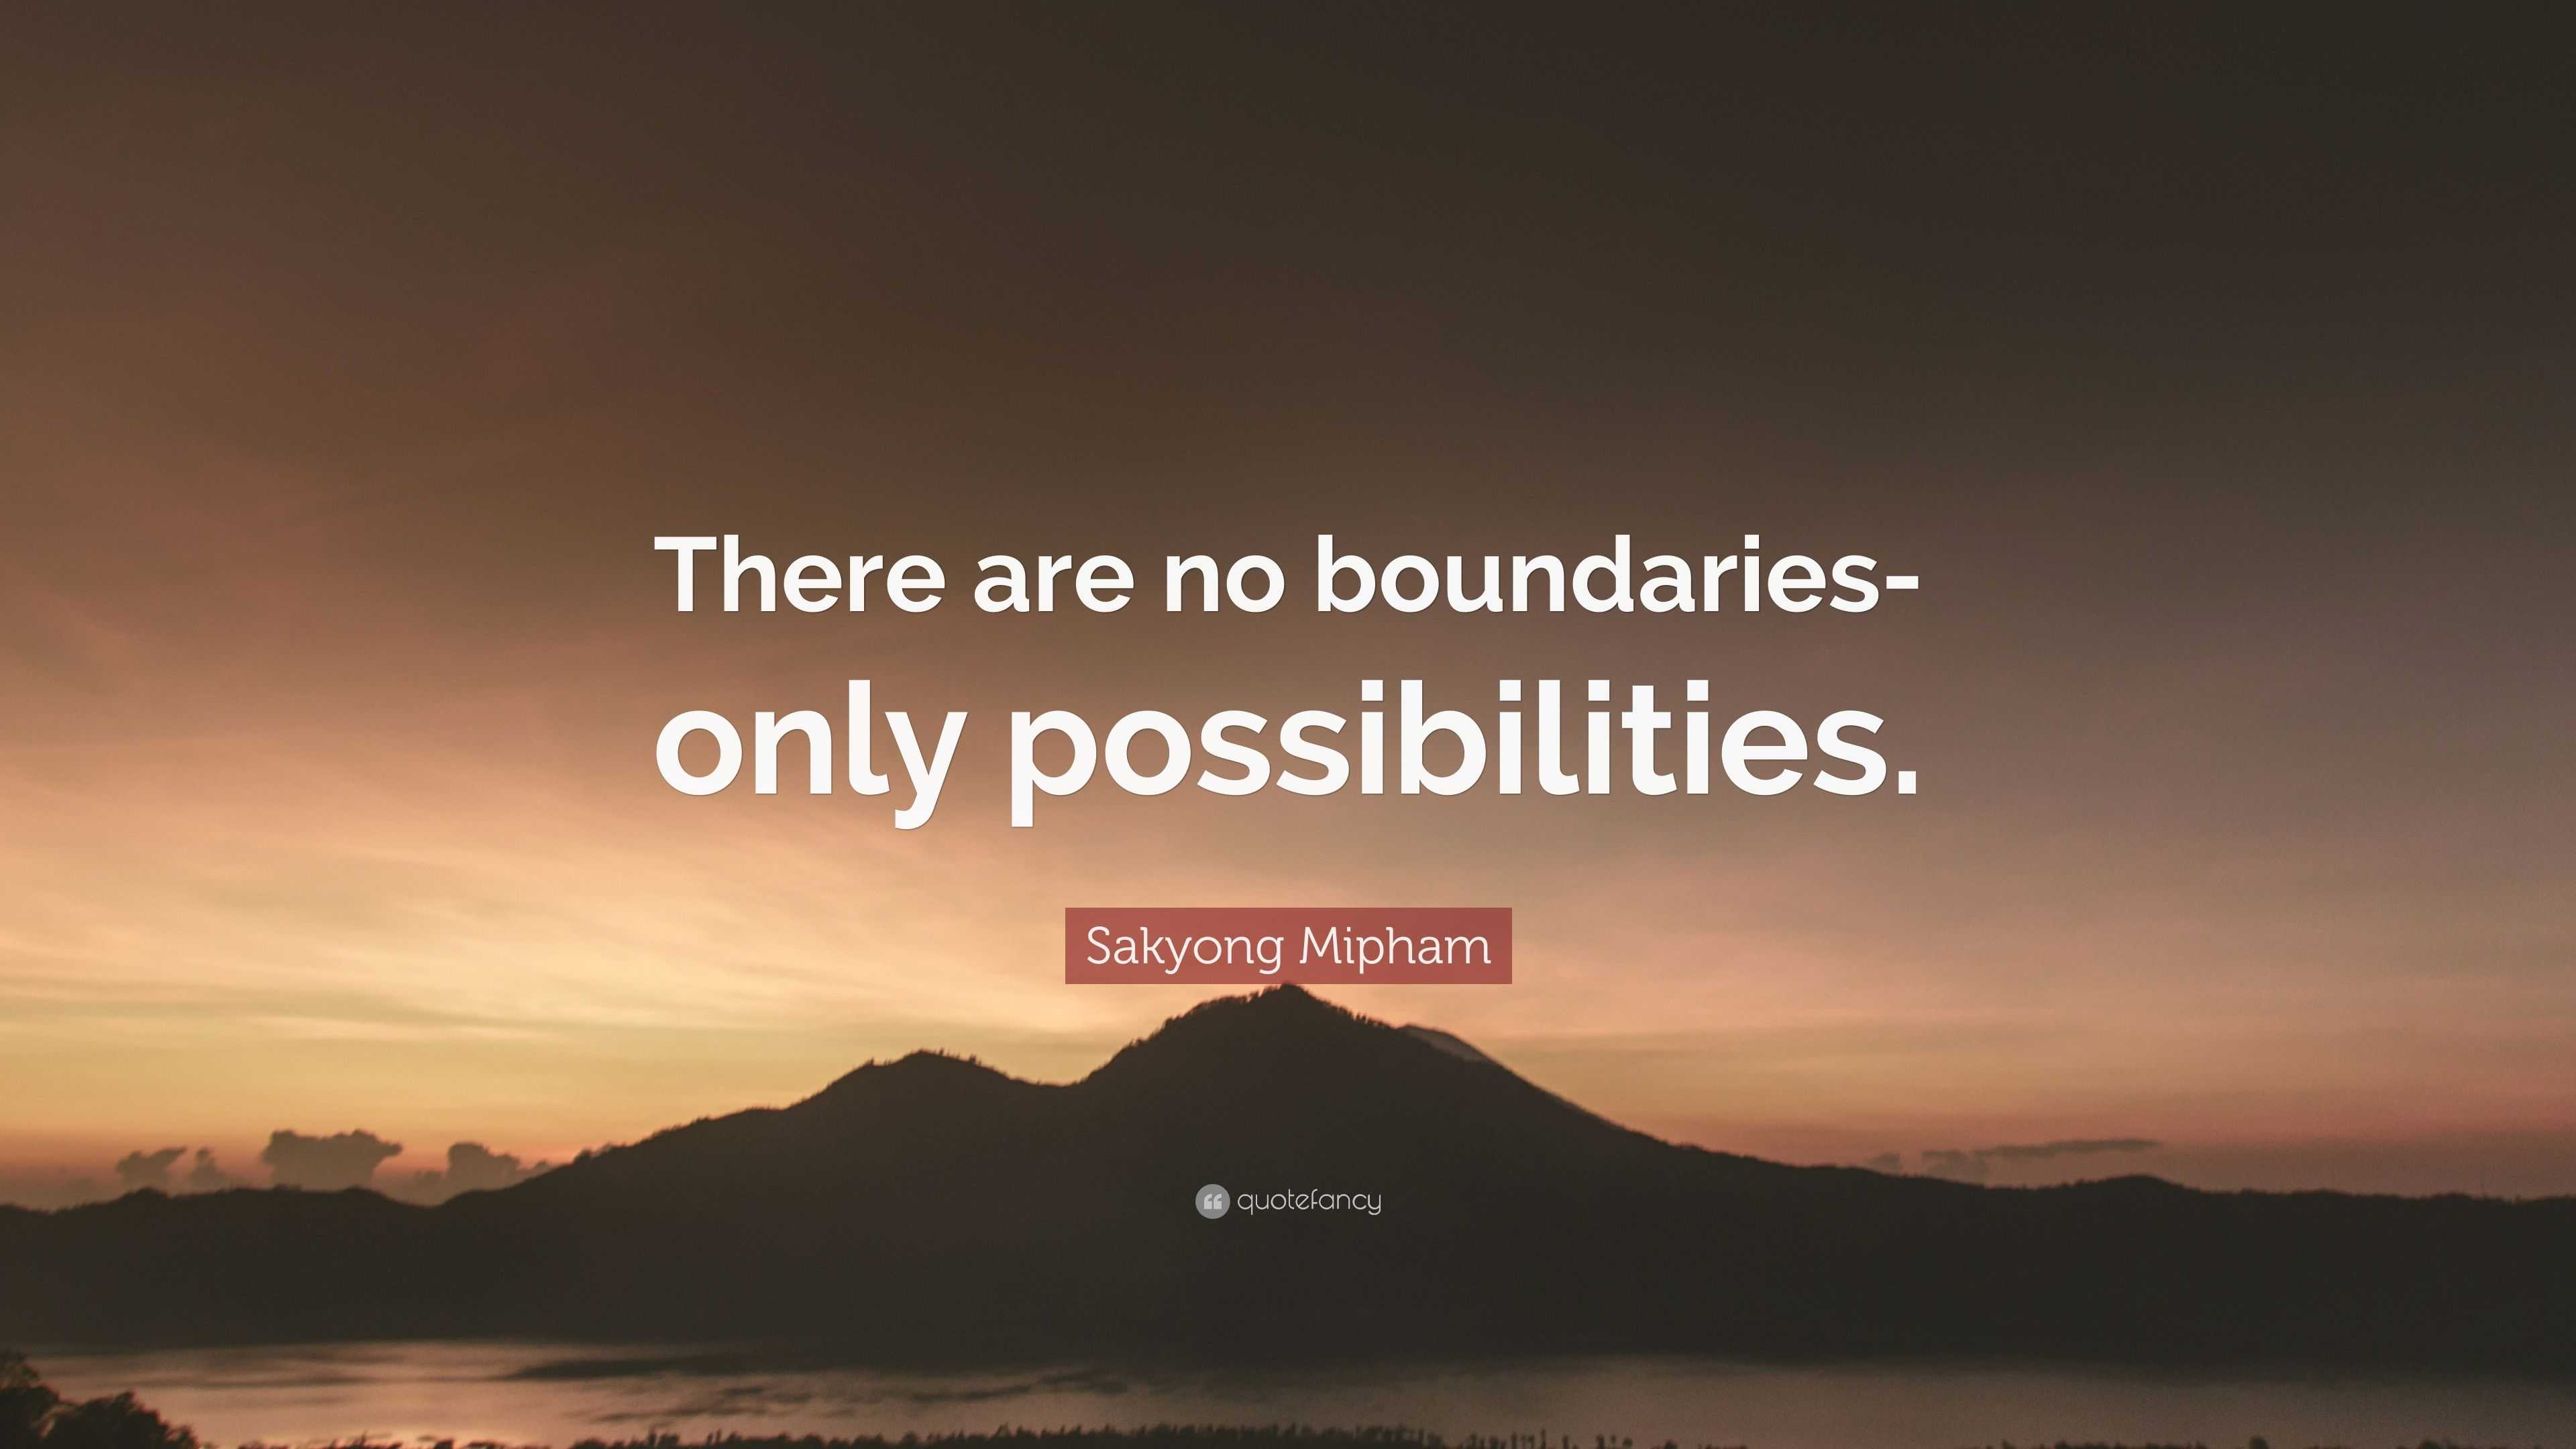 Sakyong Mipham Quote: “There are no boundaries-only possibilities.”